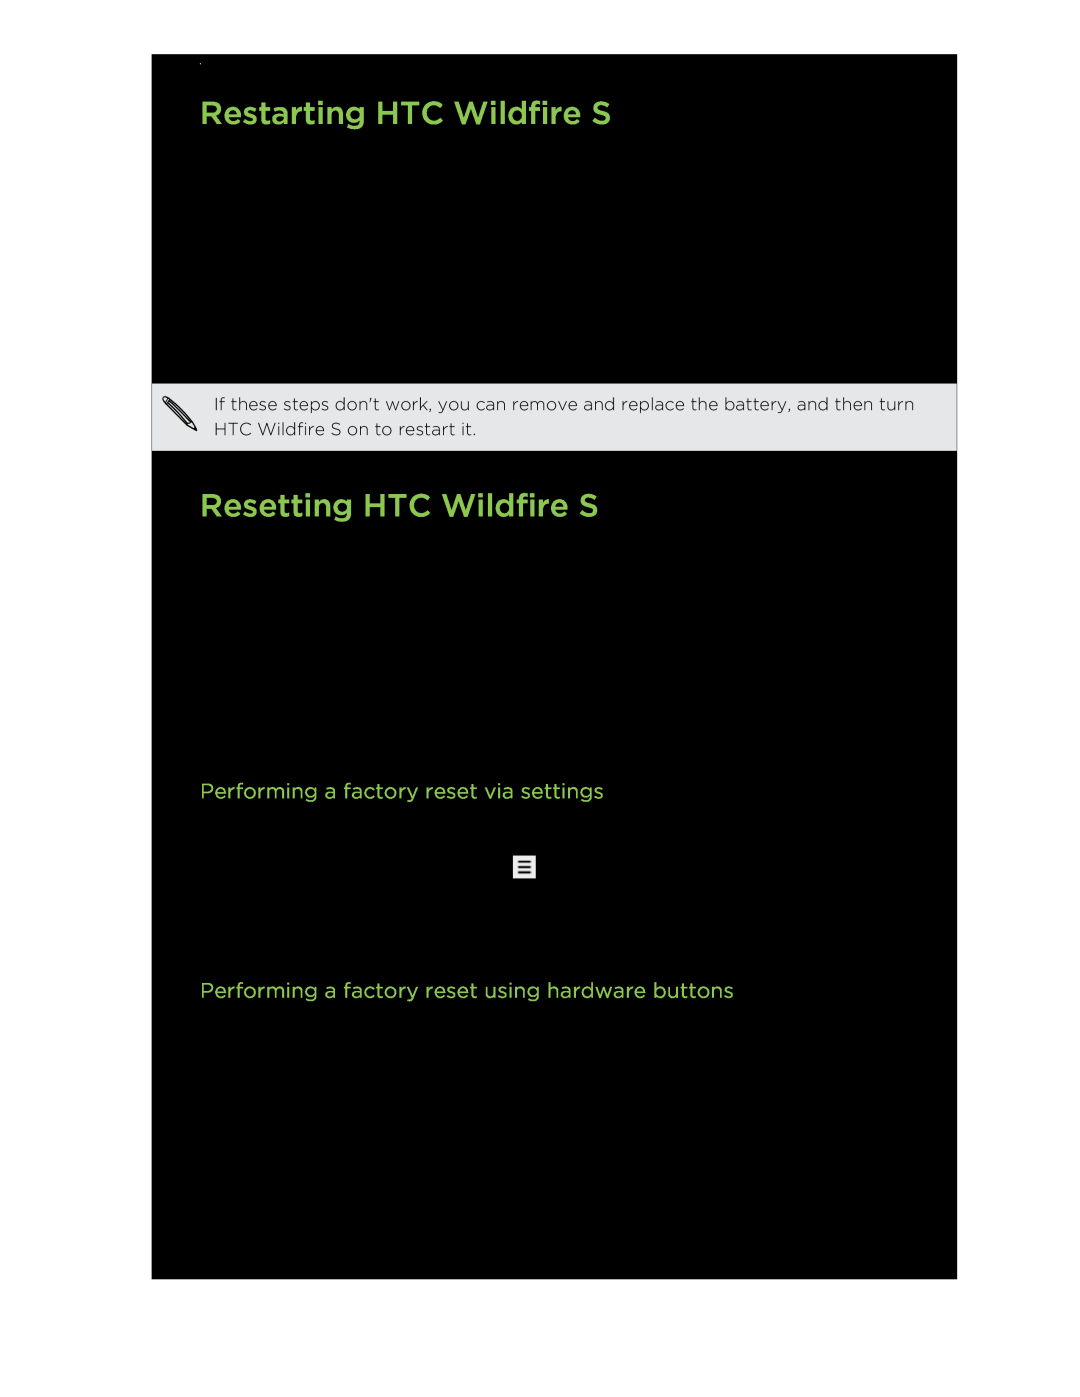 HTC manual Restarting HTC Wildfire S, Resetting HTC Wildfire S, Performing a factory reset via settings 